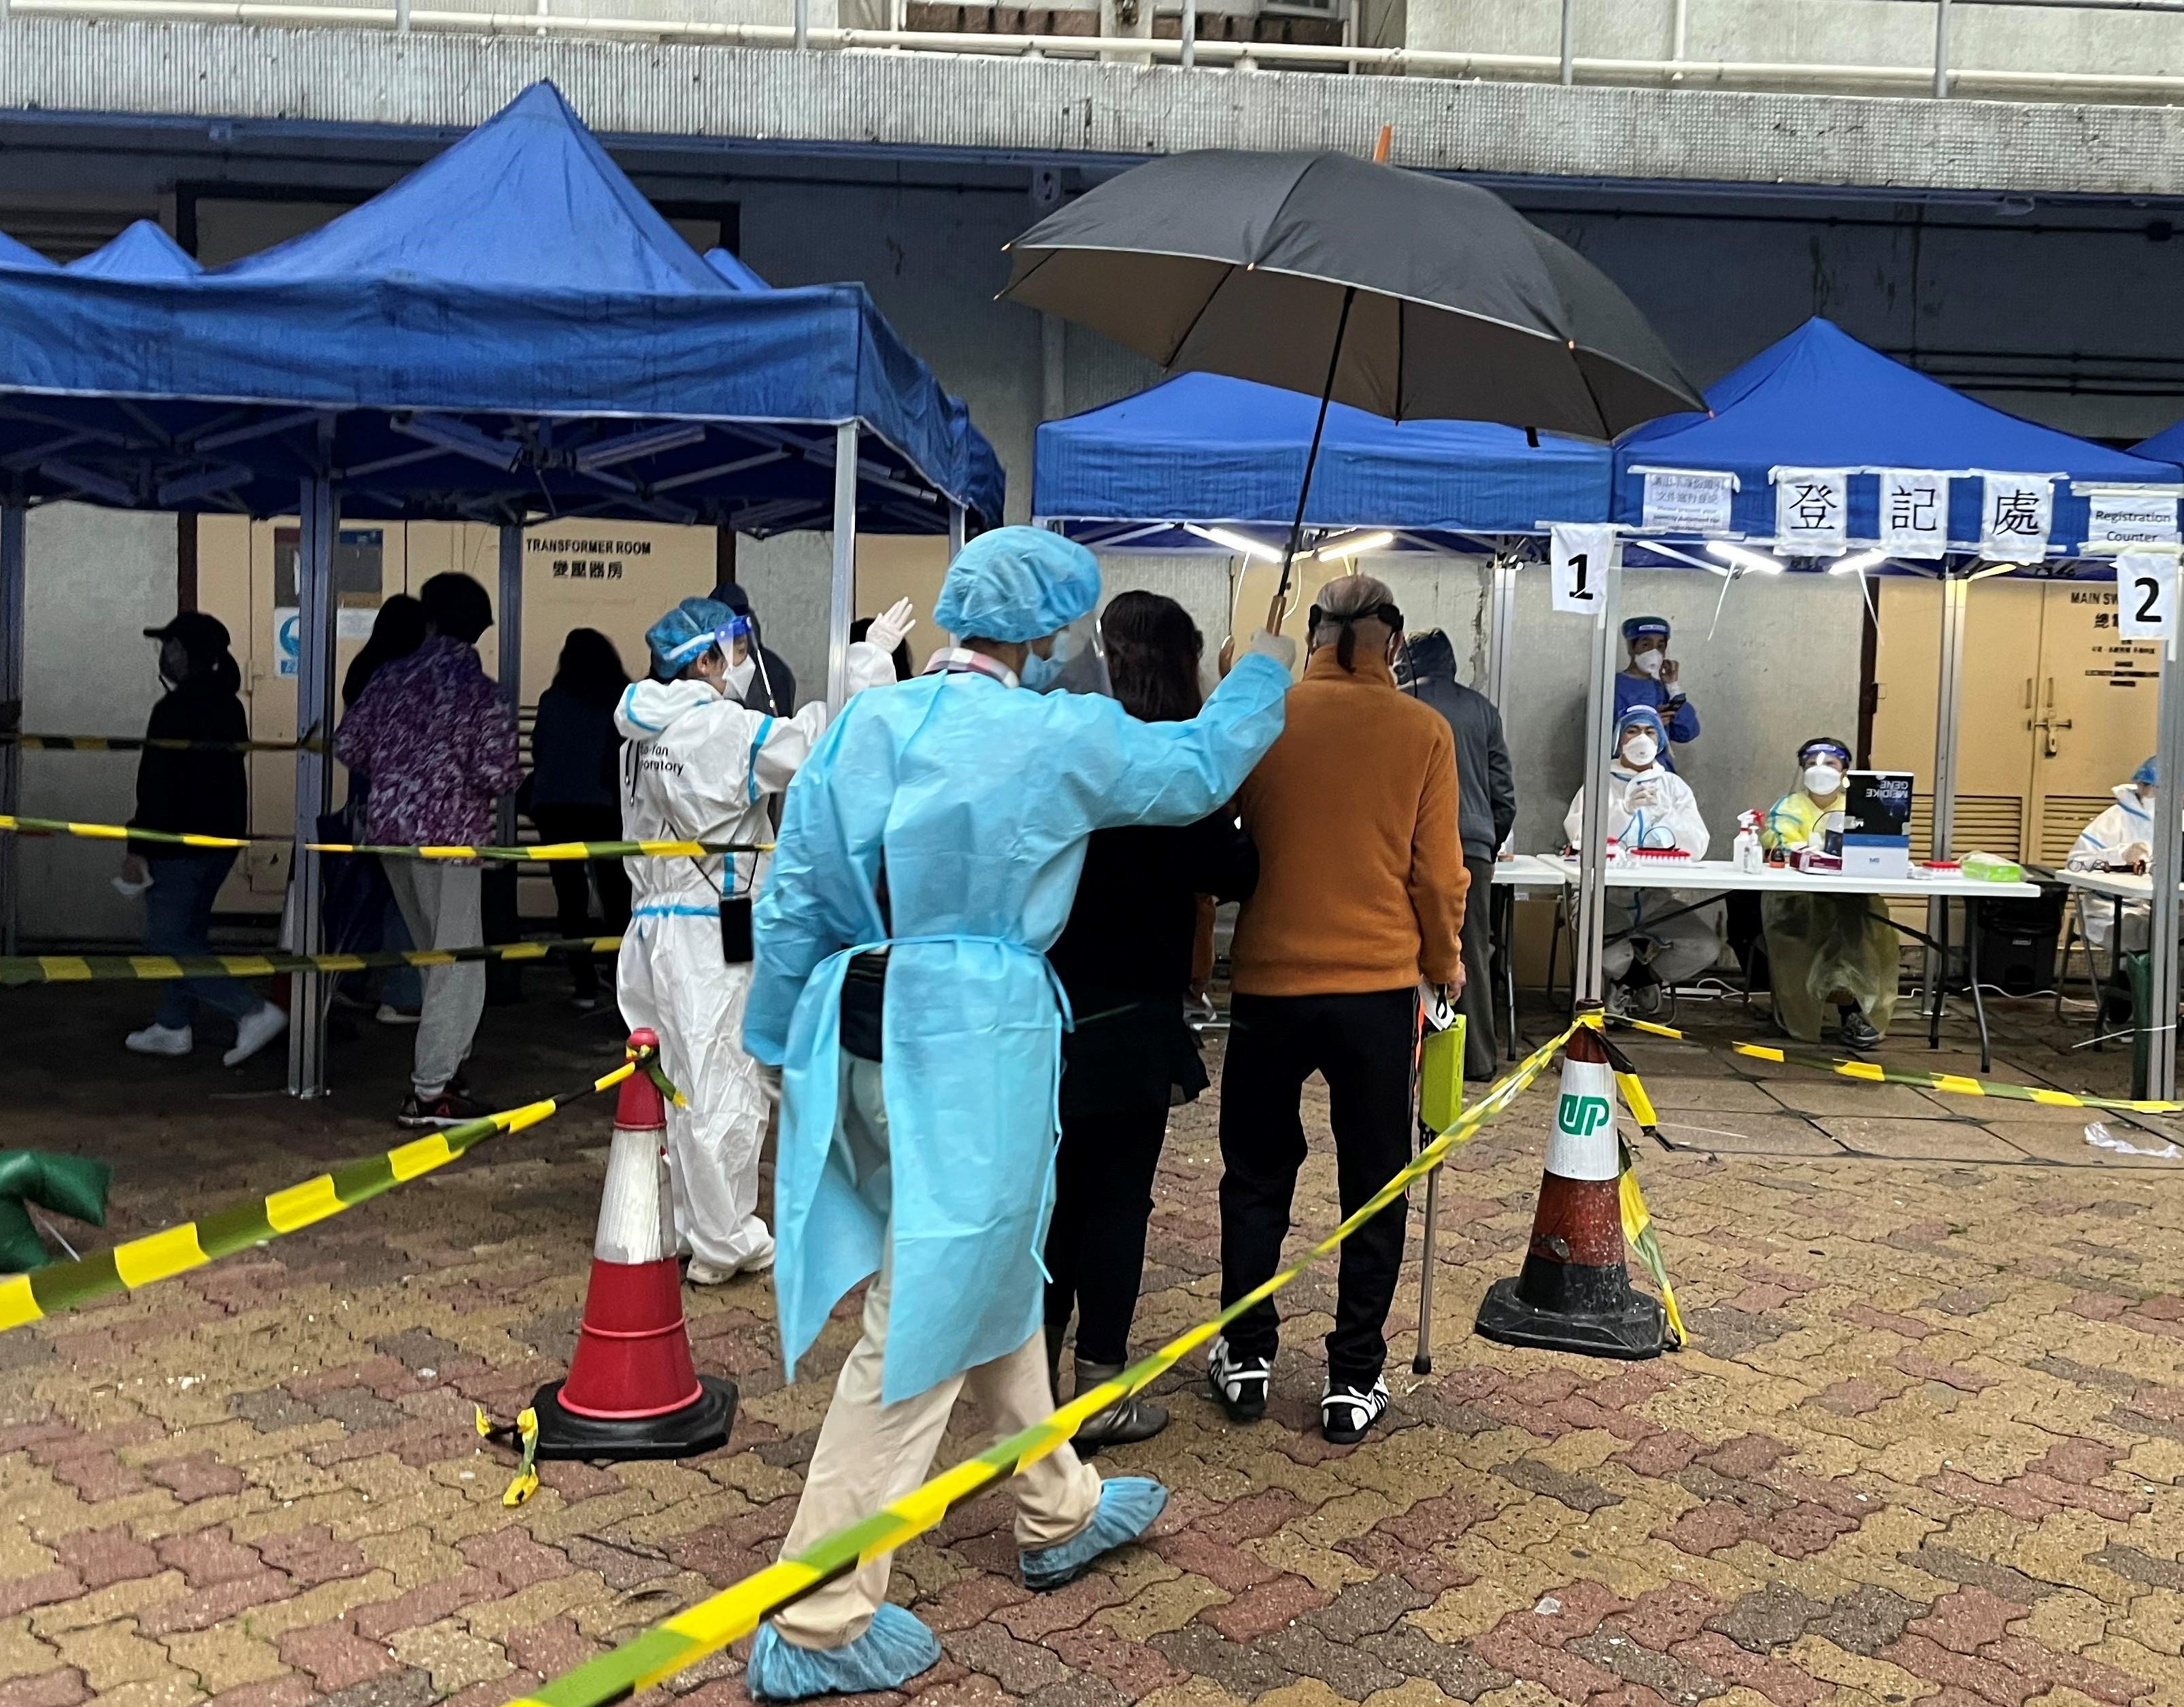 The Government yesterday (March 28) enforced "restriction-testing declaration" and compulsory testing notice in respect of specified "restricted area" in Cheung Chi House, Cheung Wah Estate, Fanling. Photo shows staff members of the Agriculture, Fisheries and Conservation Department guiding residents subject to compulsory testing to specimen collection stations in batches to undergo a nucleic acid test.